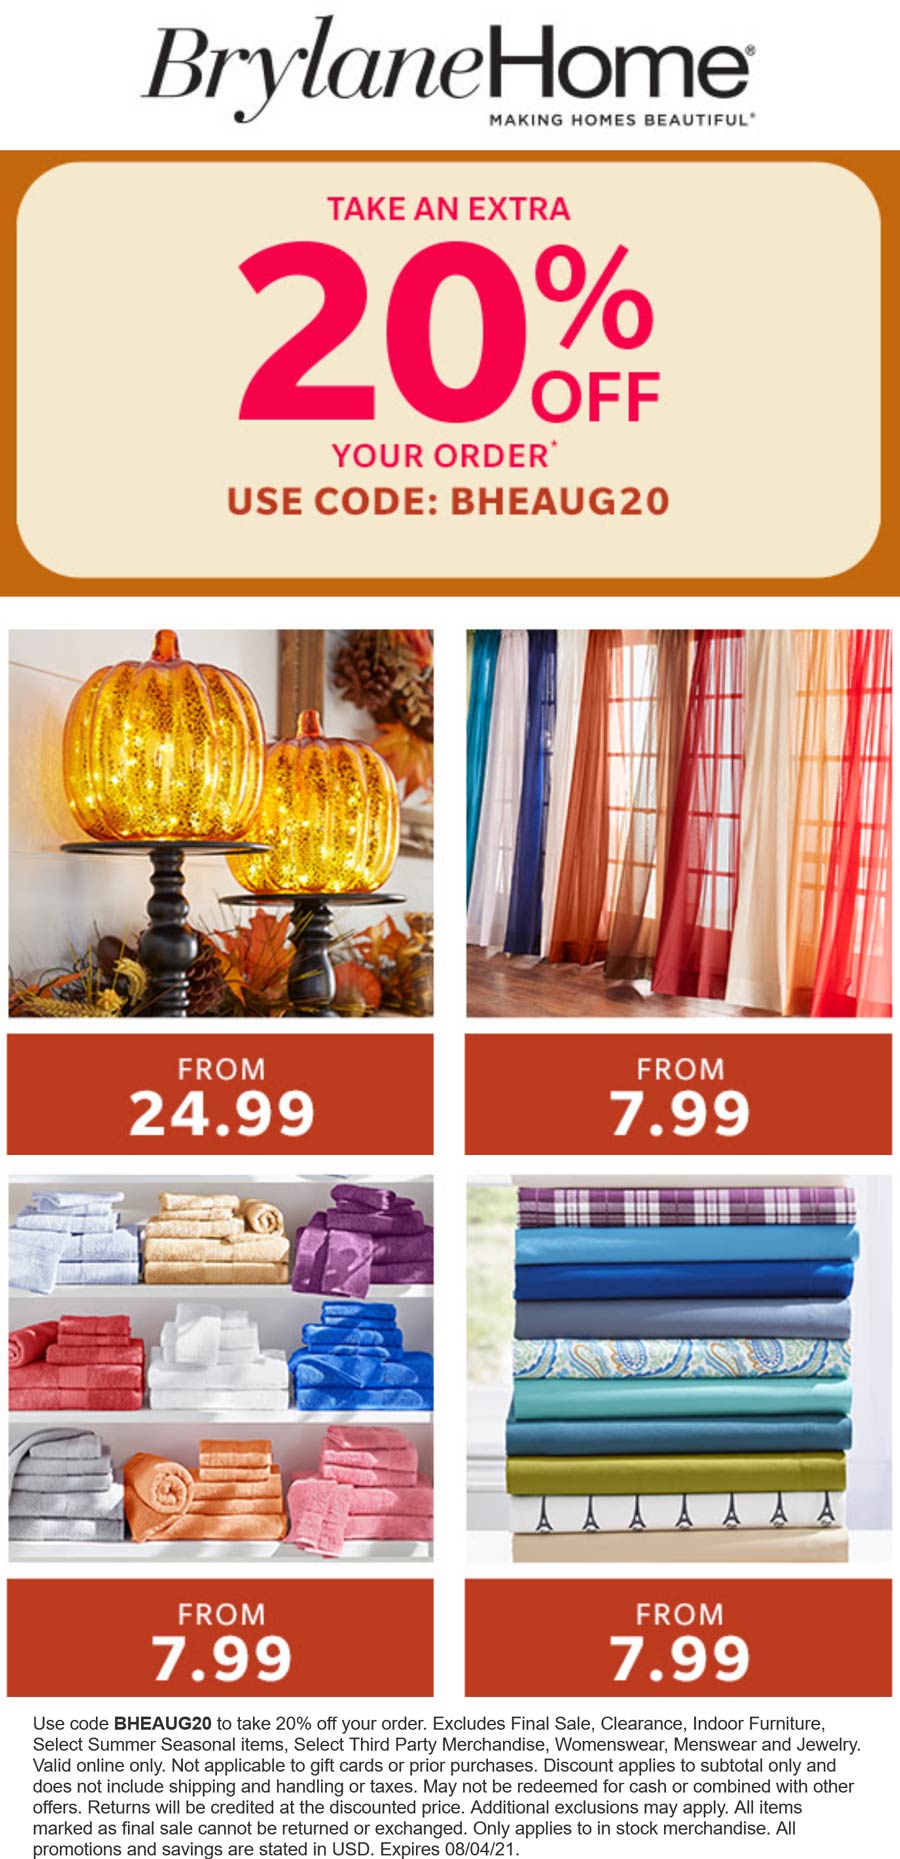 Brylane Home stores Coupon  Extra 20% off at Brylane Home via promo code BHEAUG20 #brylanehome 